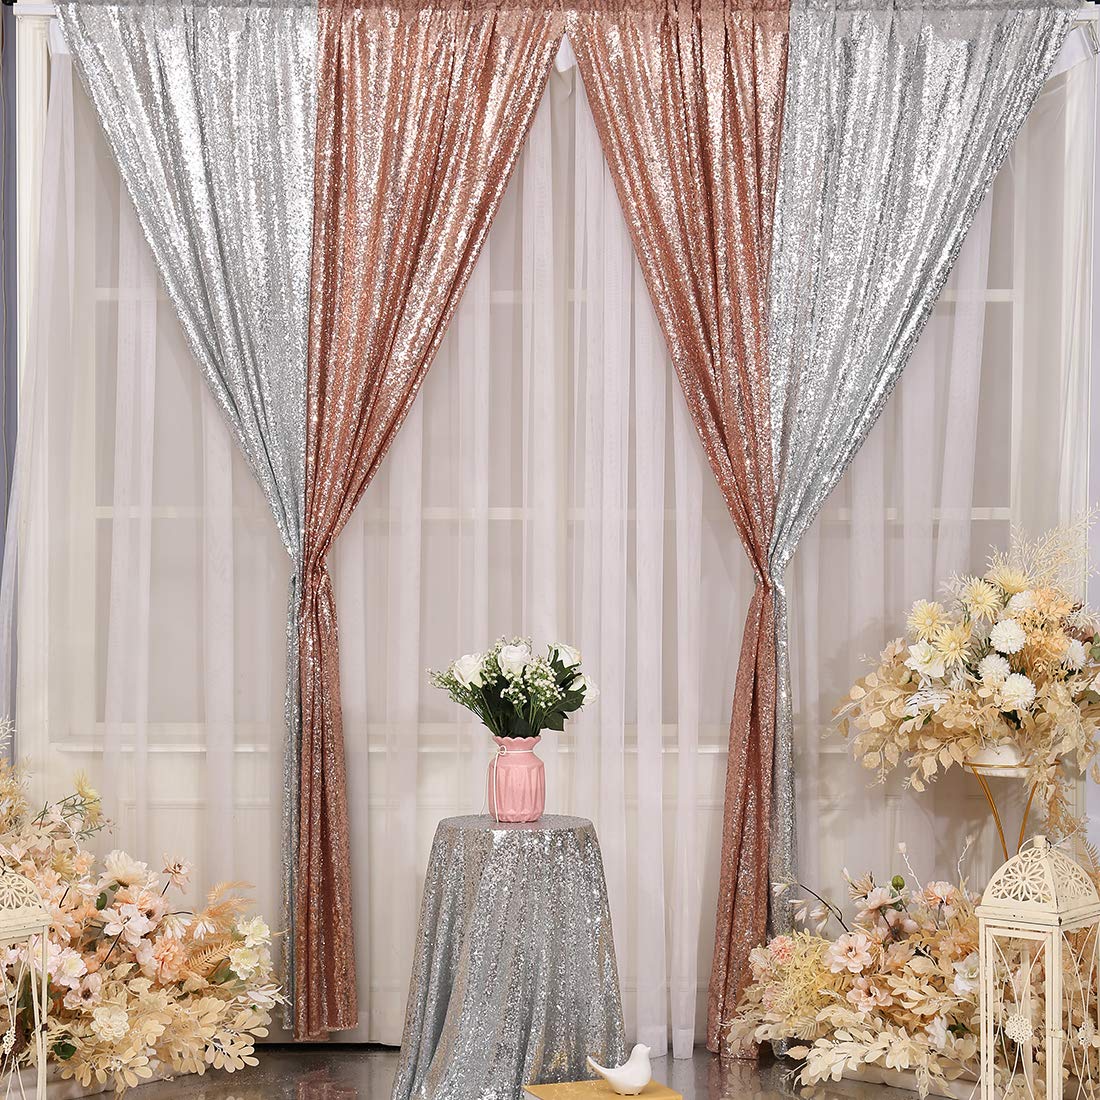 Poise3EHome 2Pcs 3Ft x 8Ft Silver Sequin Backdrop Curtain, Glitter Photography Background, Sequence Xmas Thanksgiving Backdrop for Wedding Party Holiday Festival Decor